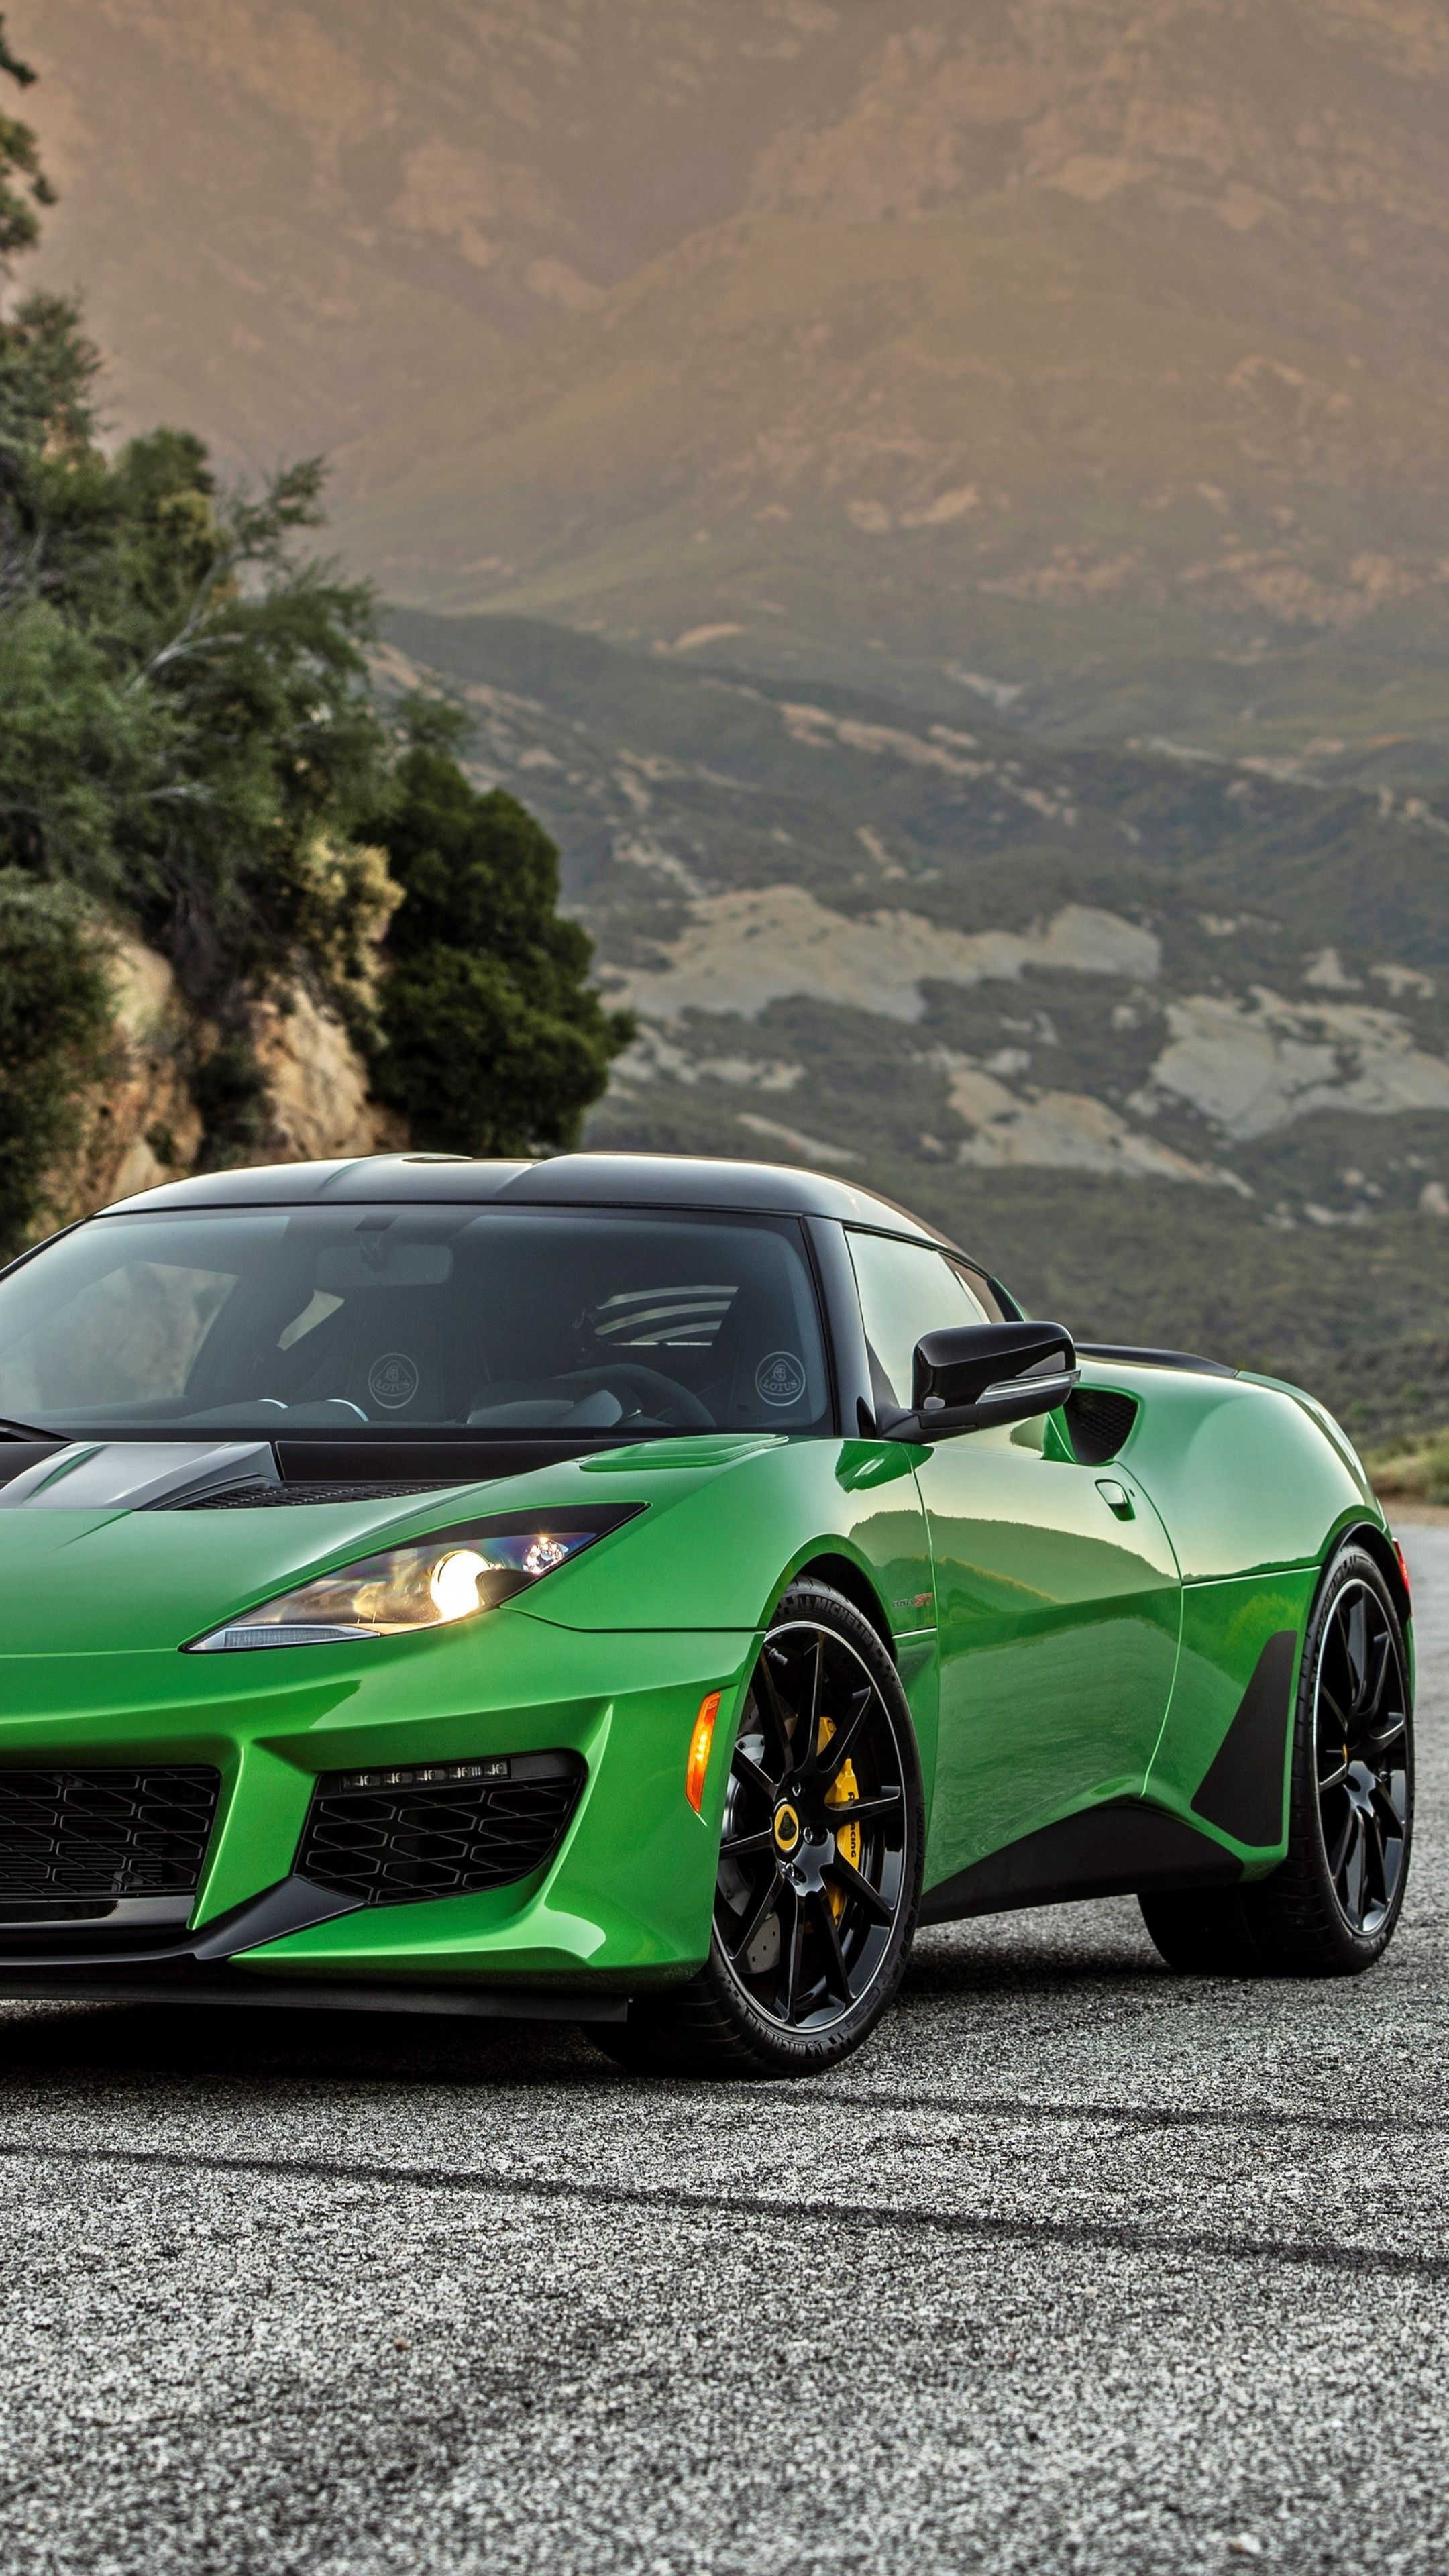 Lotus Evora, Stunning wallpapers, Sports car excellence, Unforgettable performance, 2160x3840 4K Phone